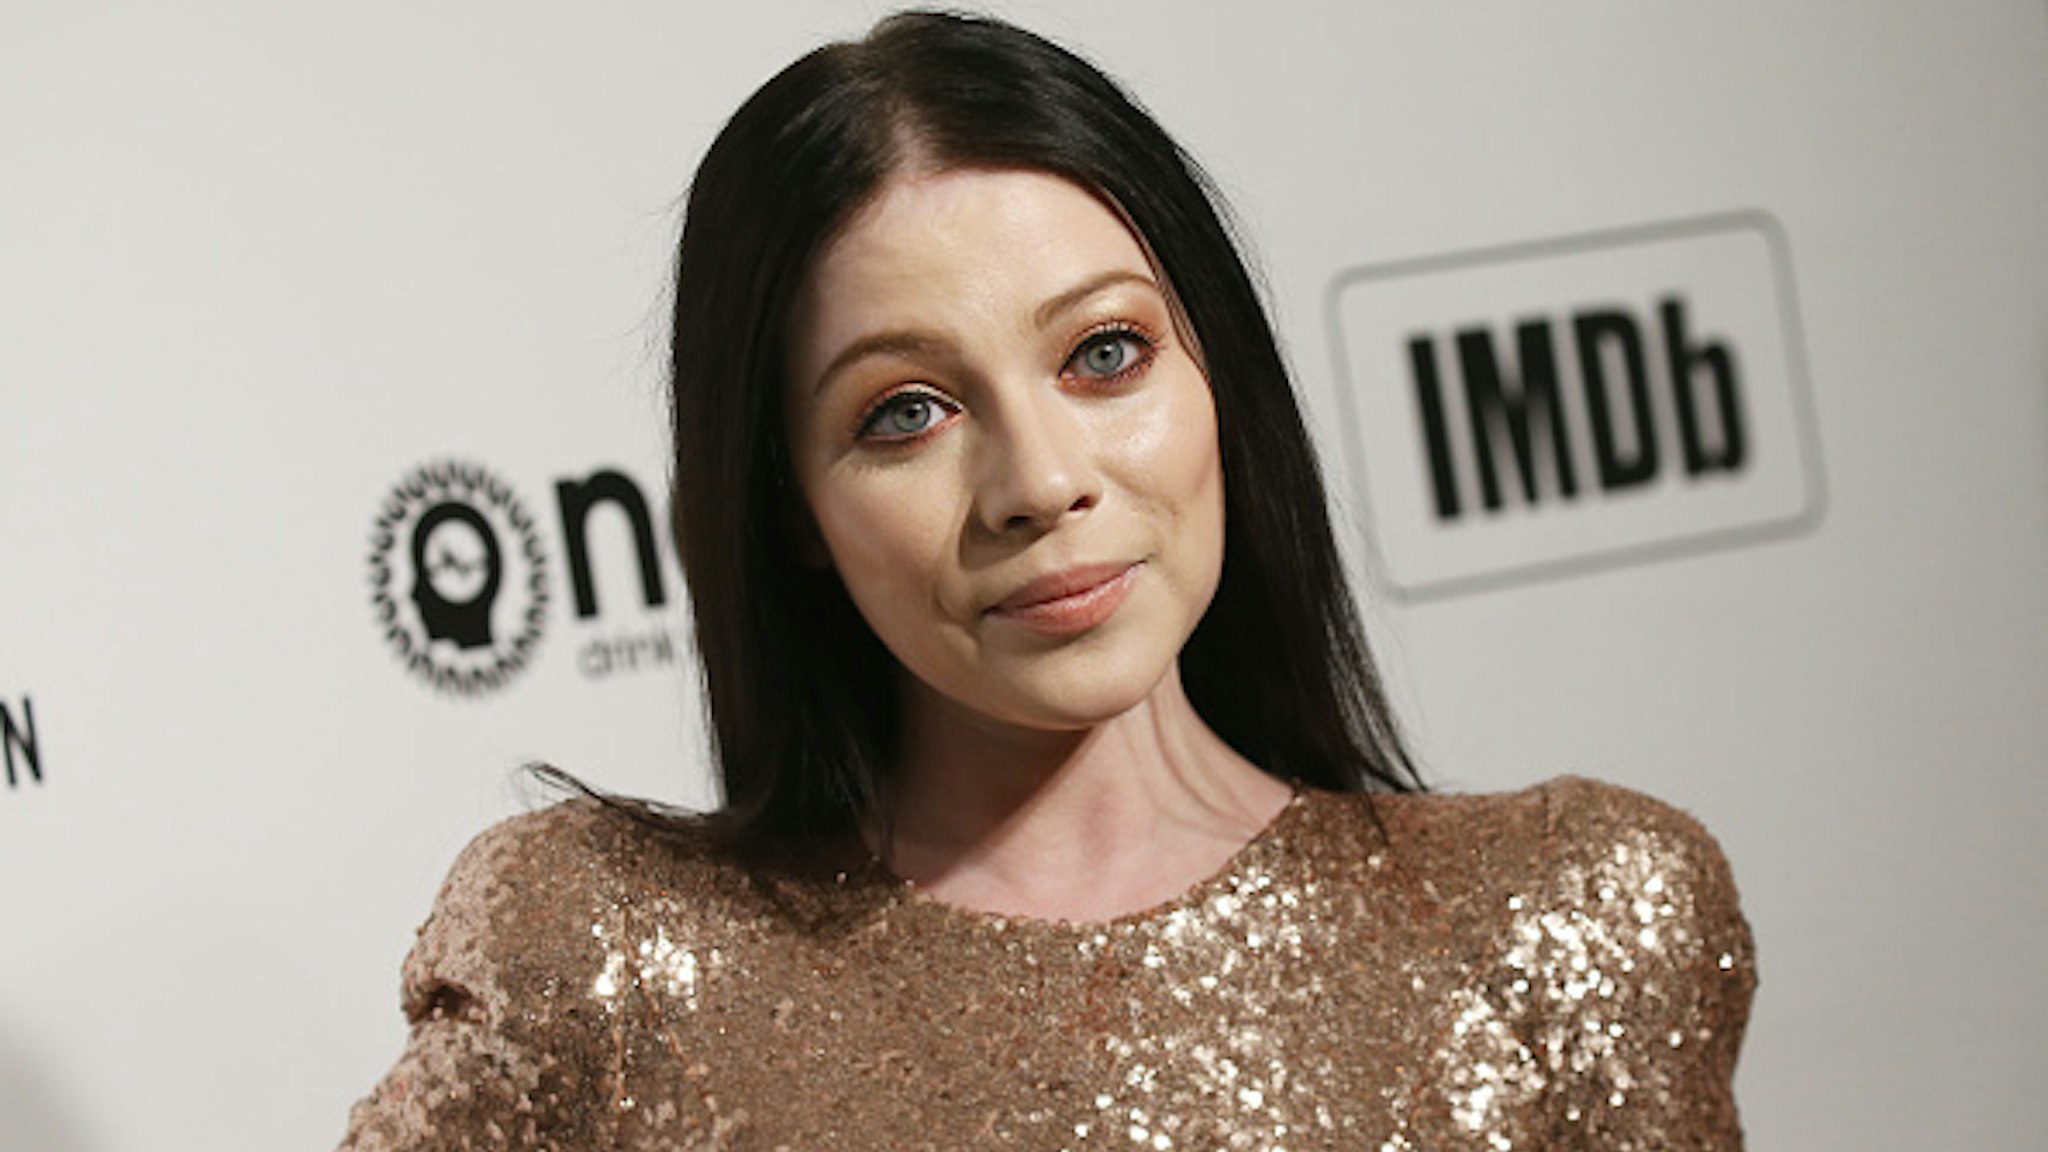 Actress Michelle Trachtenberg attends the 28th Annual Elton John AIDS Foundation Academy Awards Viewing Party on February 9, 2020 in West hollywood, california.